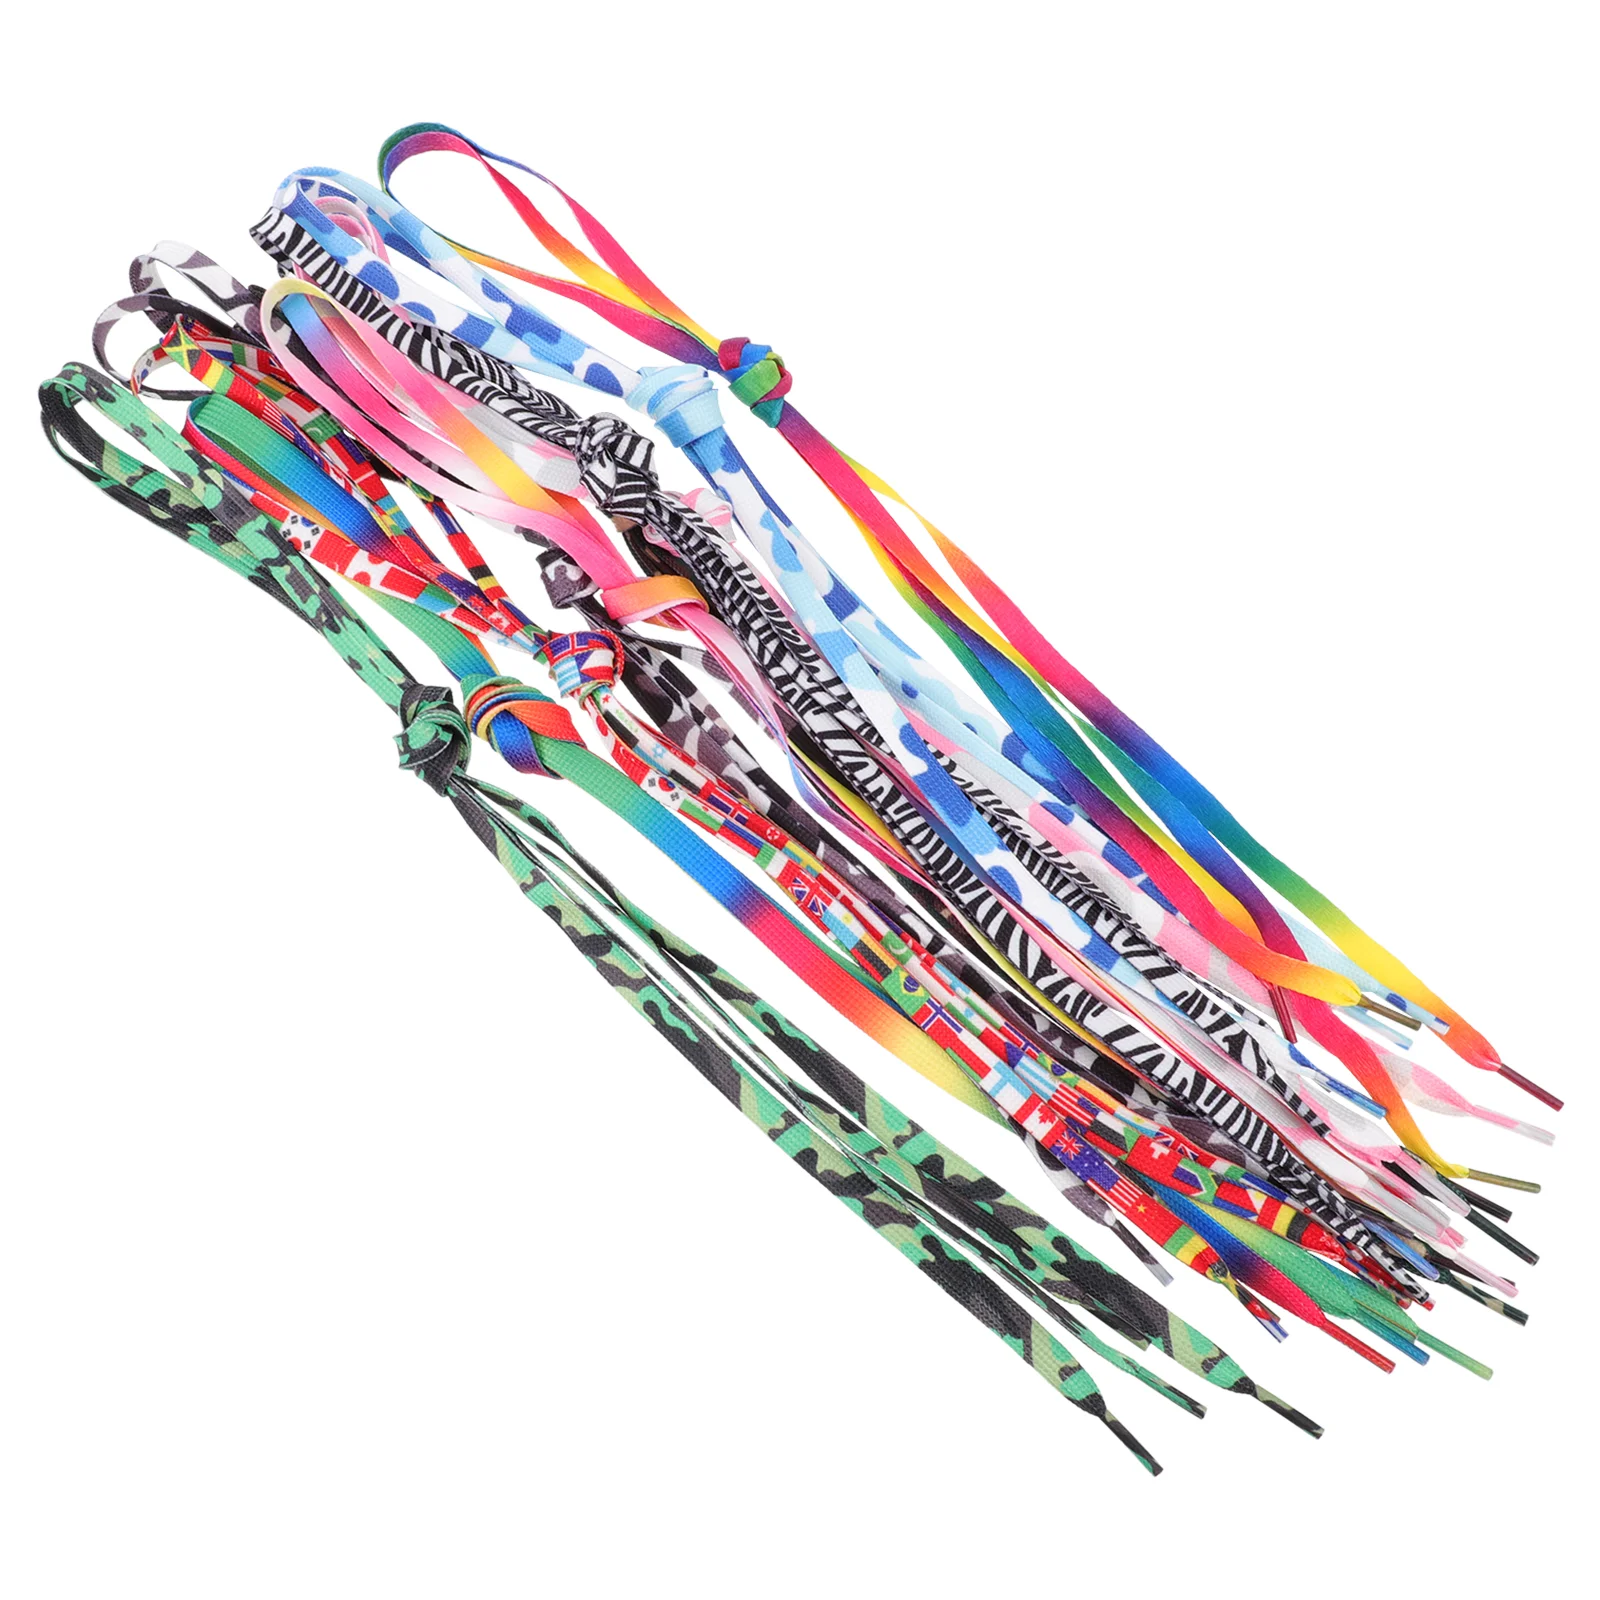 10 Pairs Outdoor Shoelaces Elastic Shoelaces Shoelaces Replacement Laces Sneakers Running Shoes Laces Colorful Sneakers